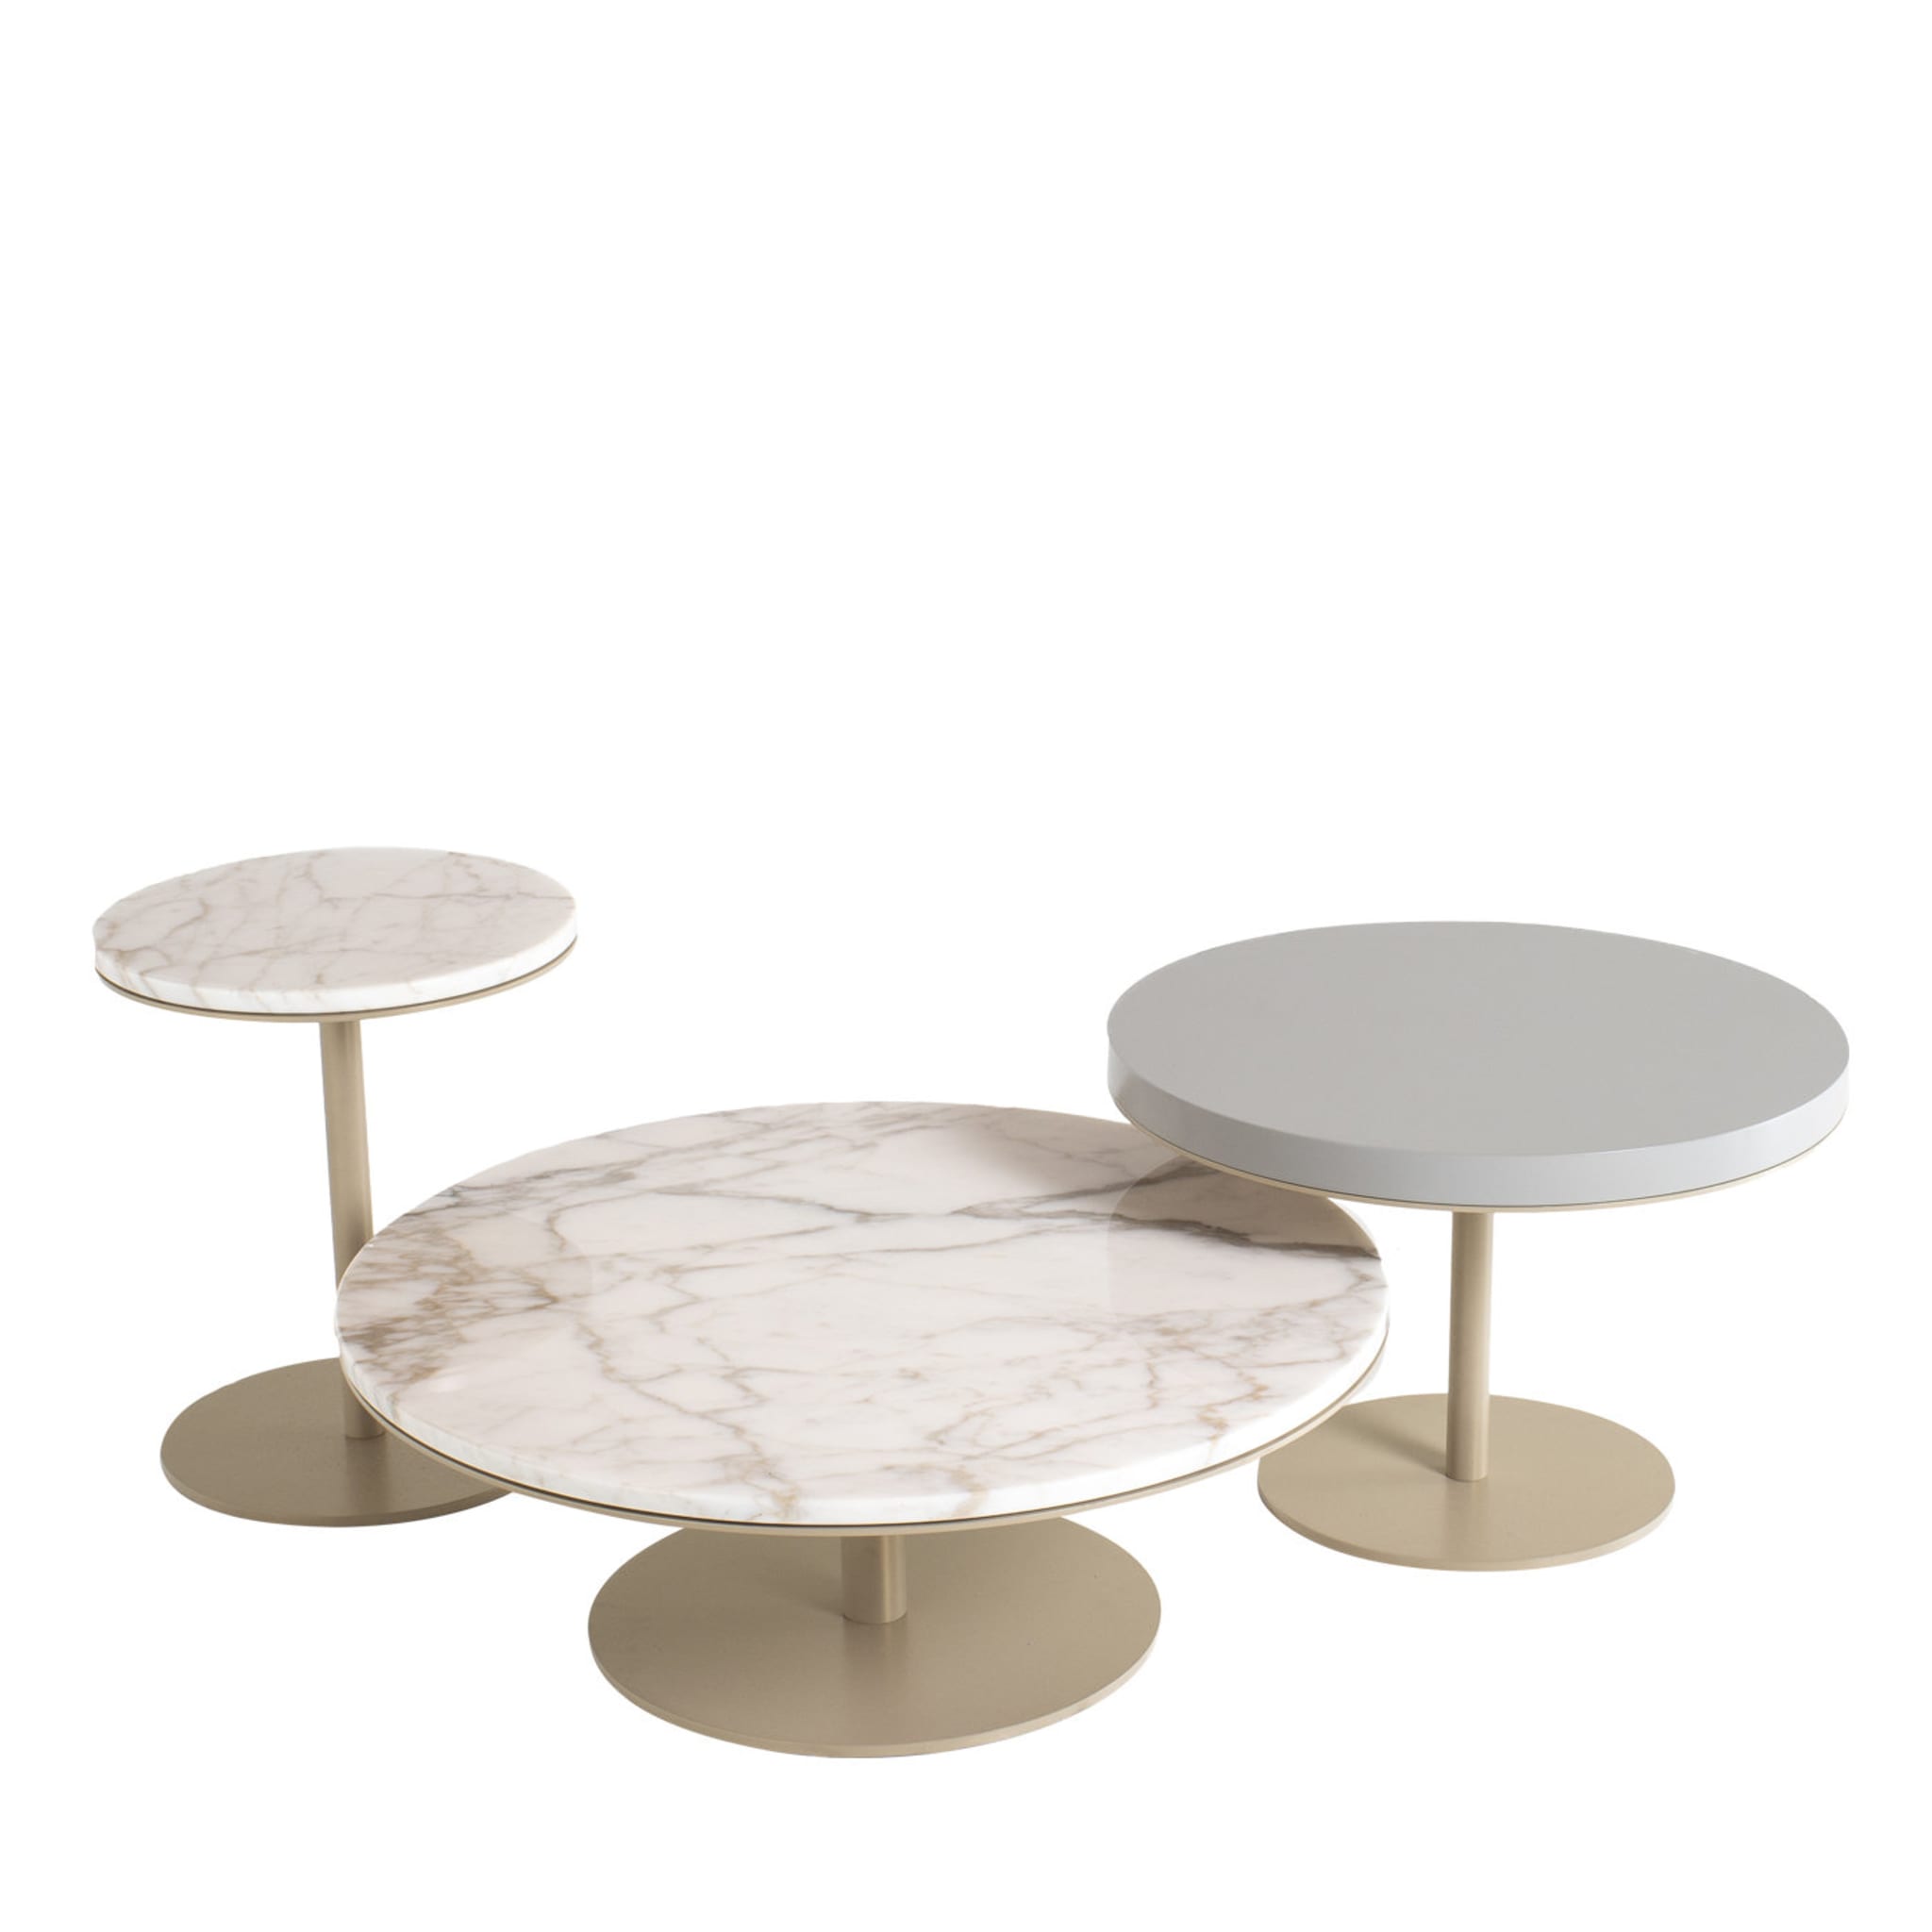 Set of 3 Round Serving Tables - Main view